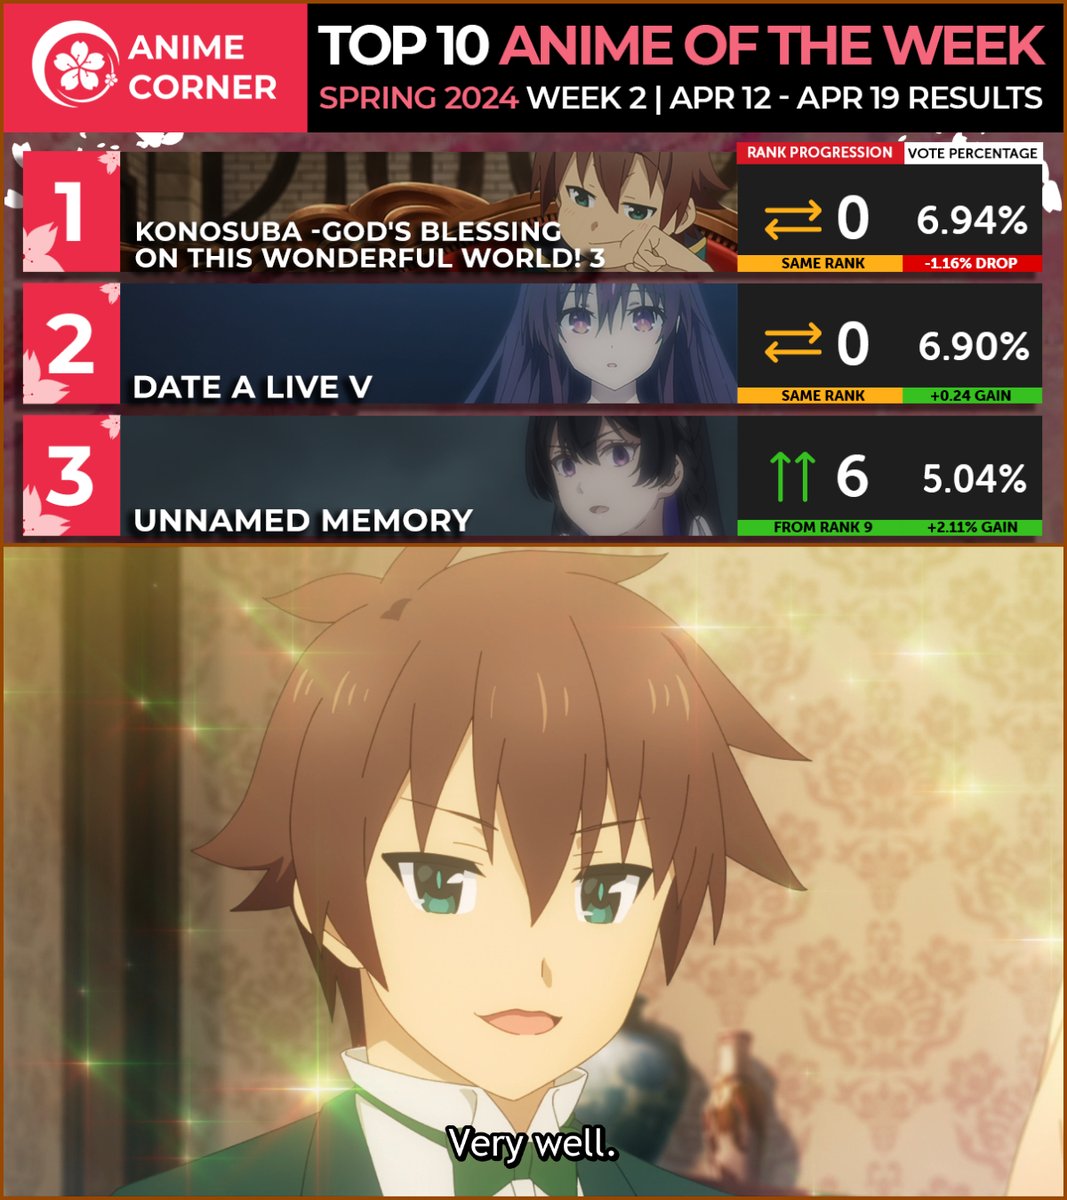 Konosuba stayed on top for the 2nd week in a row! ✨